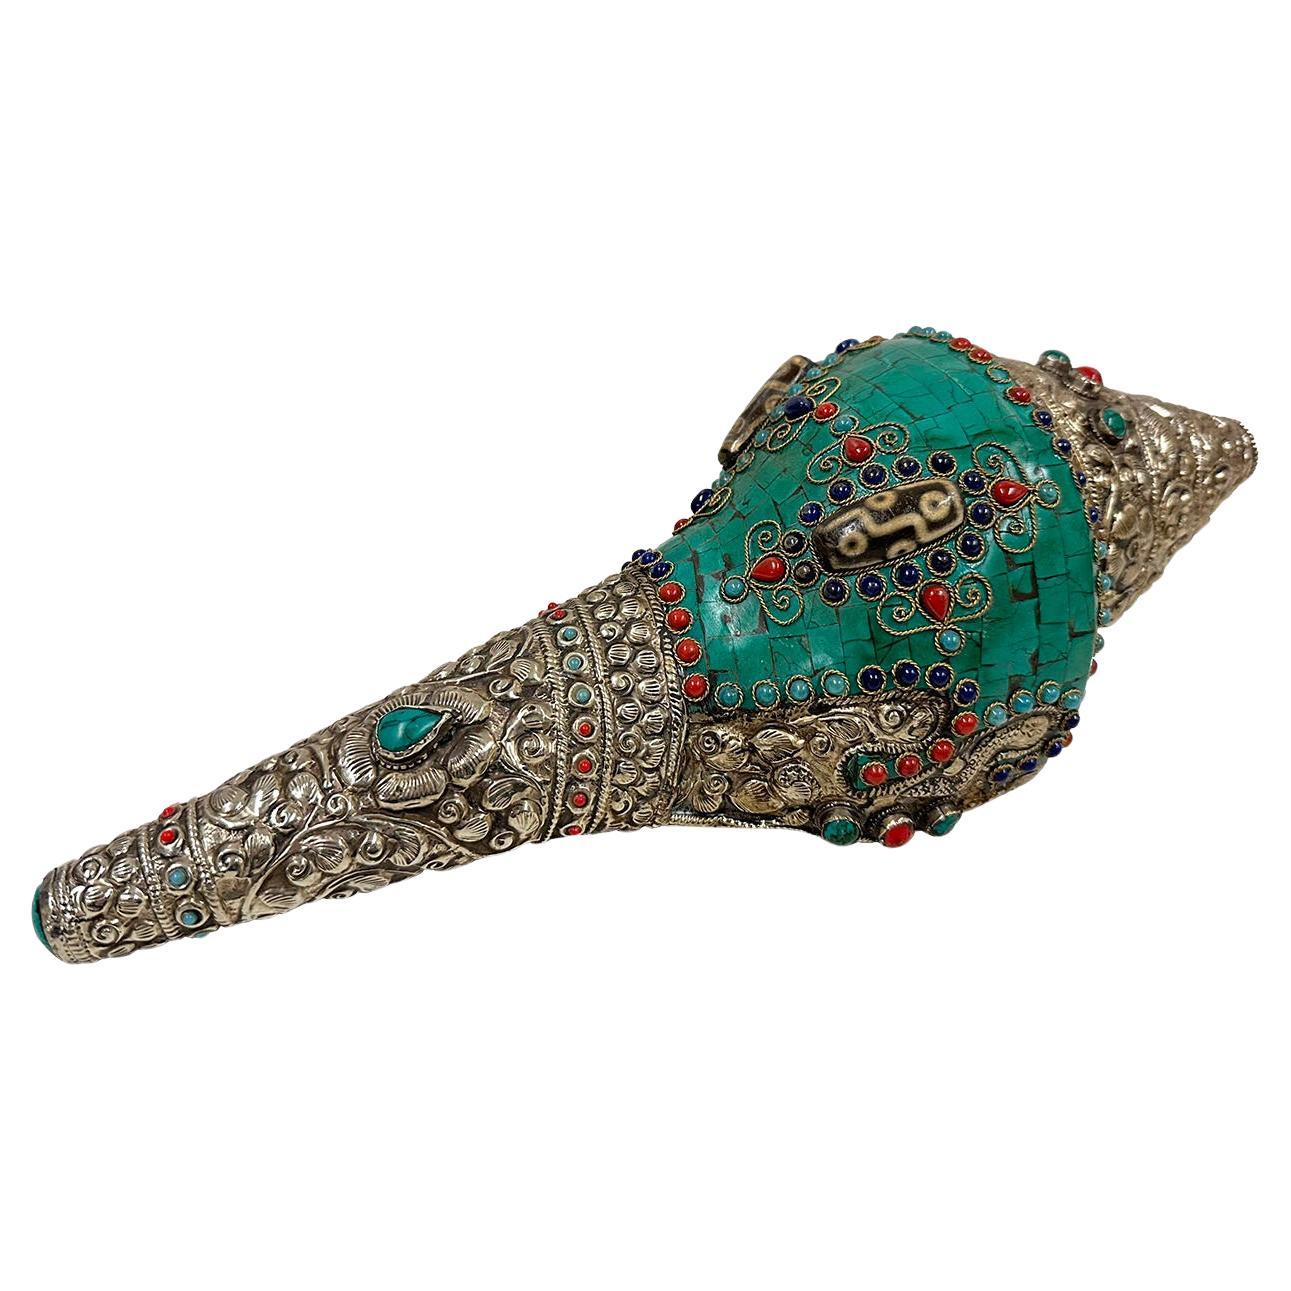  Antique Tibetan Buddhist Conch Shell with Turquoise, Coral and DZI inlay  For Sale